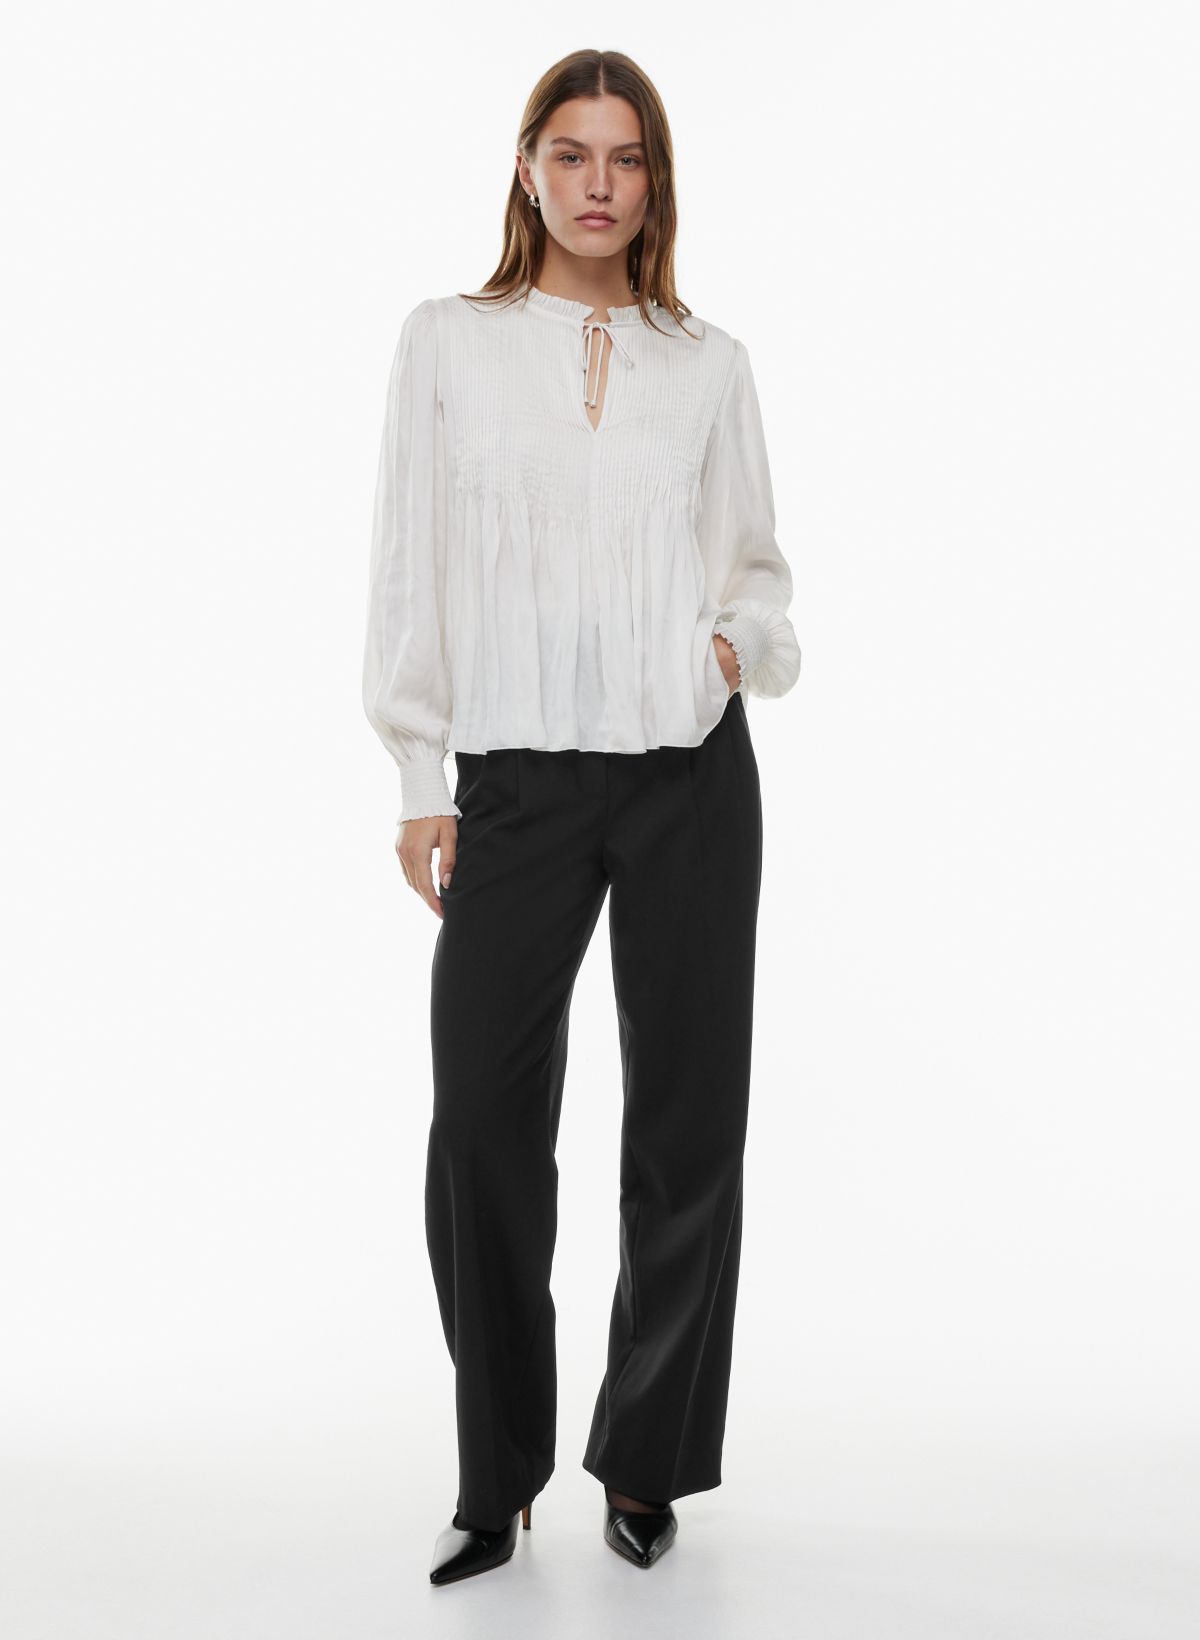 Shimmery Wide-Leg High-Rise Pant - Tall, Tall